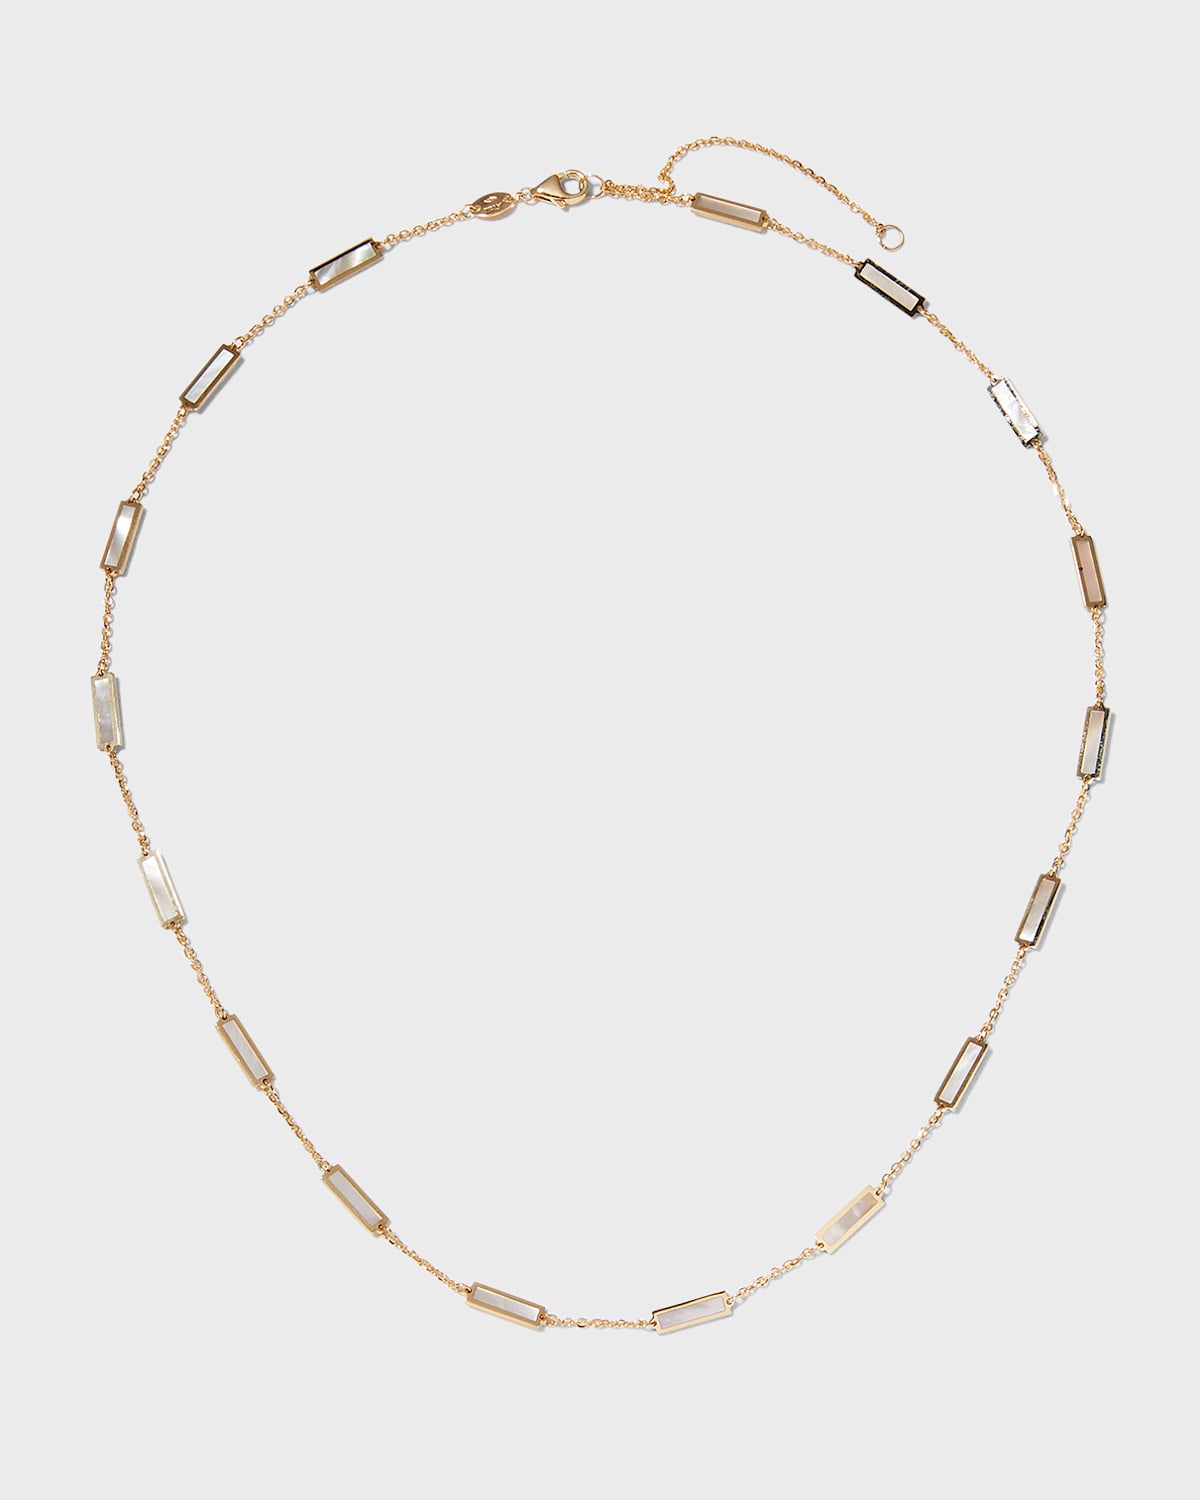 Frederic Sage Yellow Gold 17-stations White Mother-of-pearl Necklace